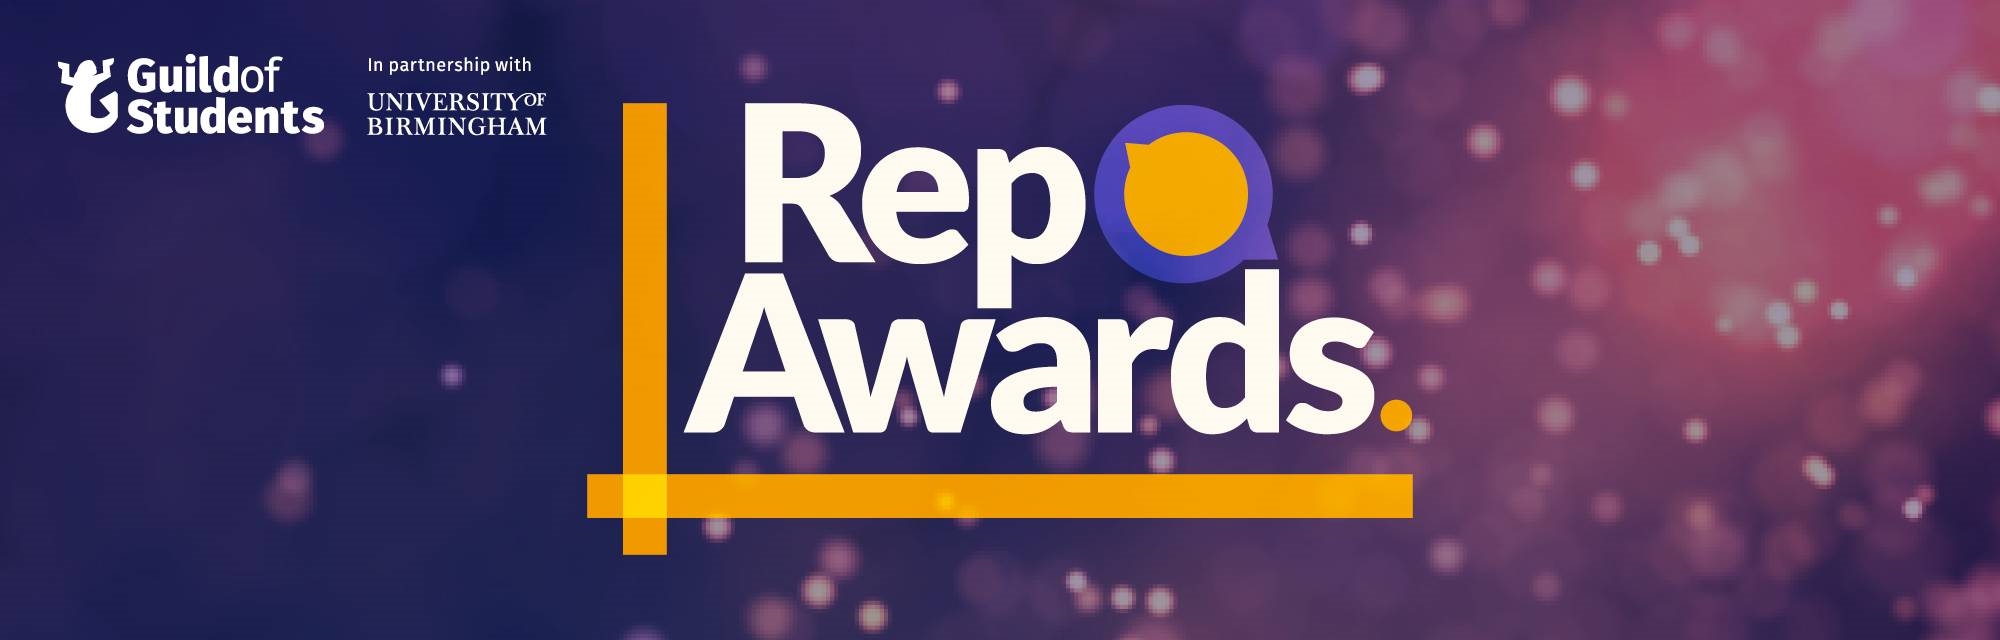 Rep Awards - Guild of Students